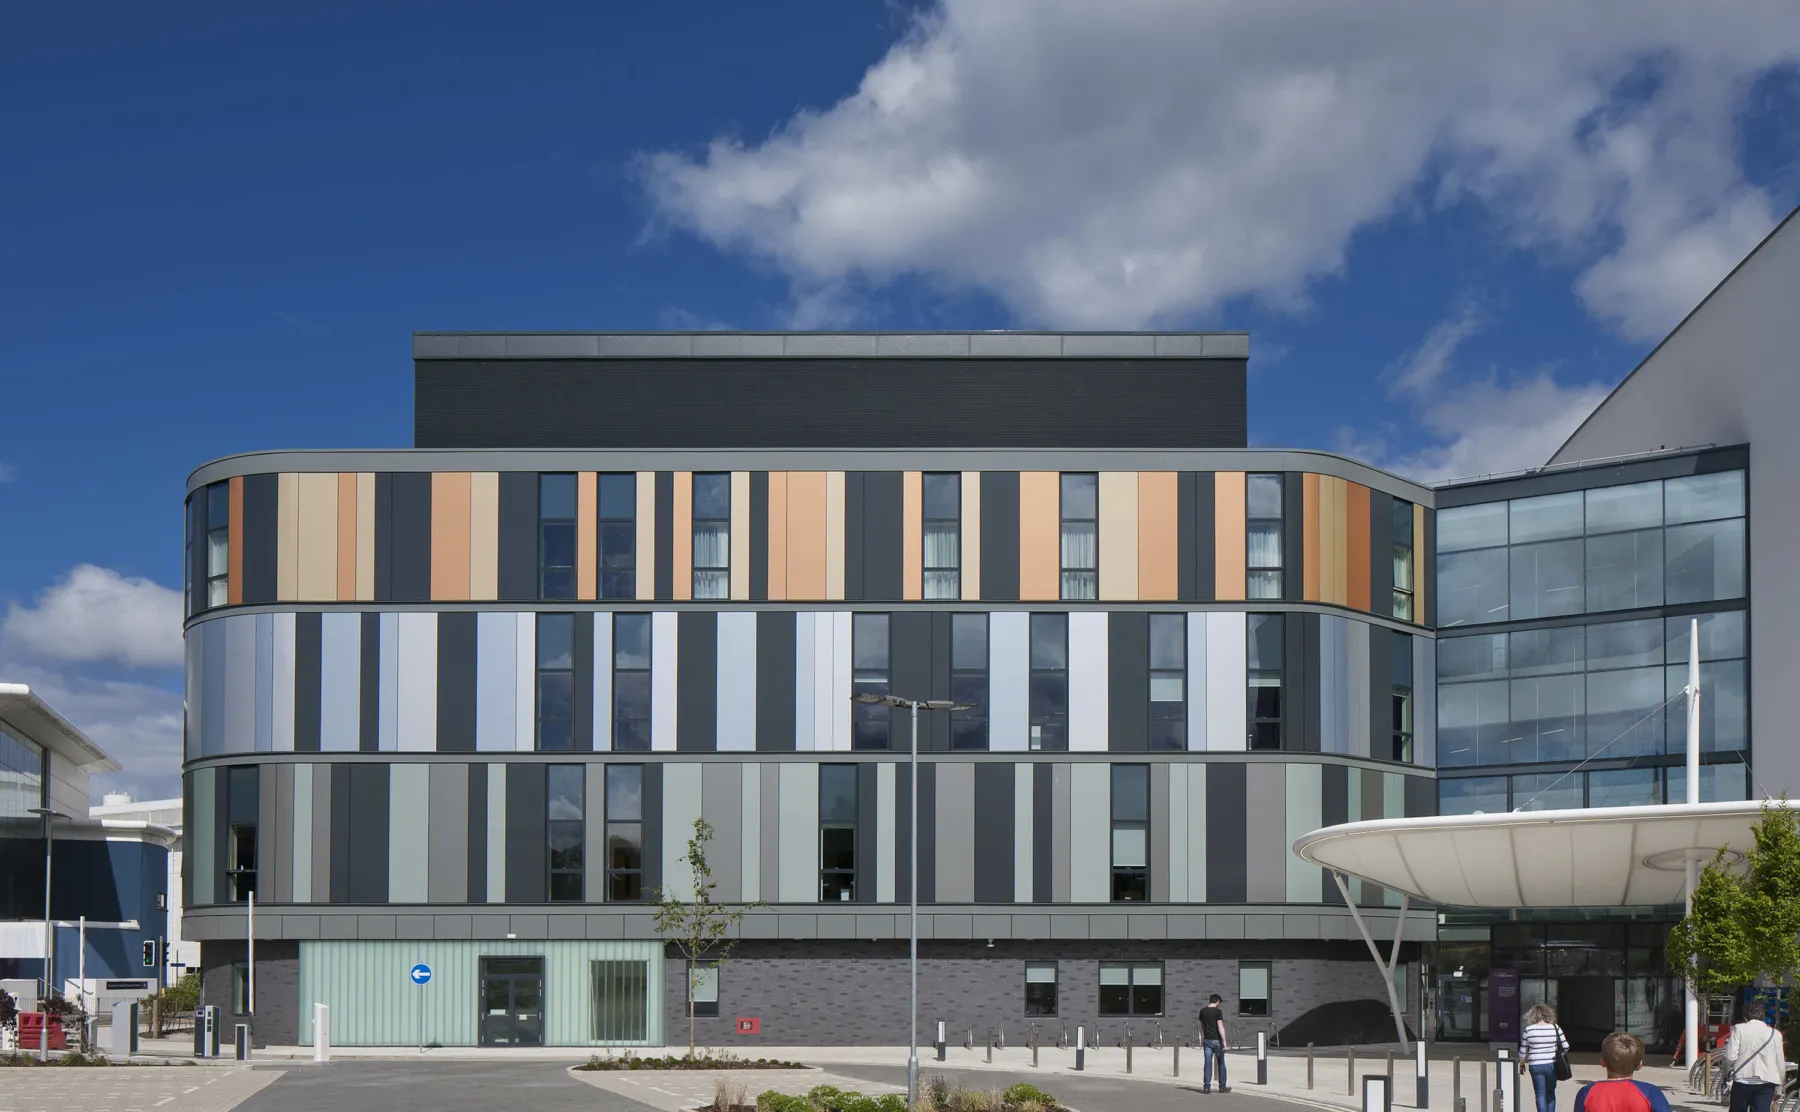 A bow-ended building at the Royal Hospital for Sick Children and Young People, Edinburgh. A purpose build new hospital, the main entrance with canopy is shown. The four storey building in the centre of the image is clad in copper, grey and green tones.